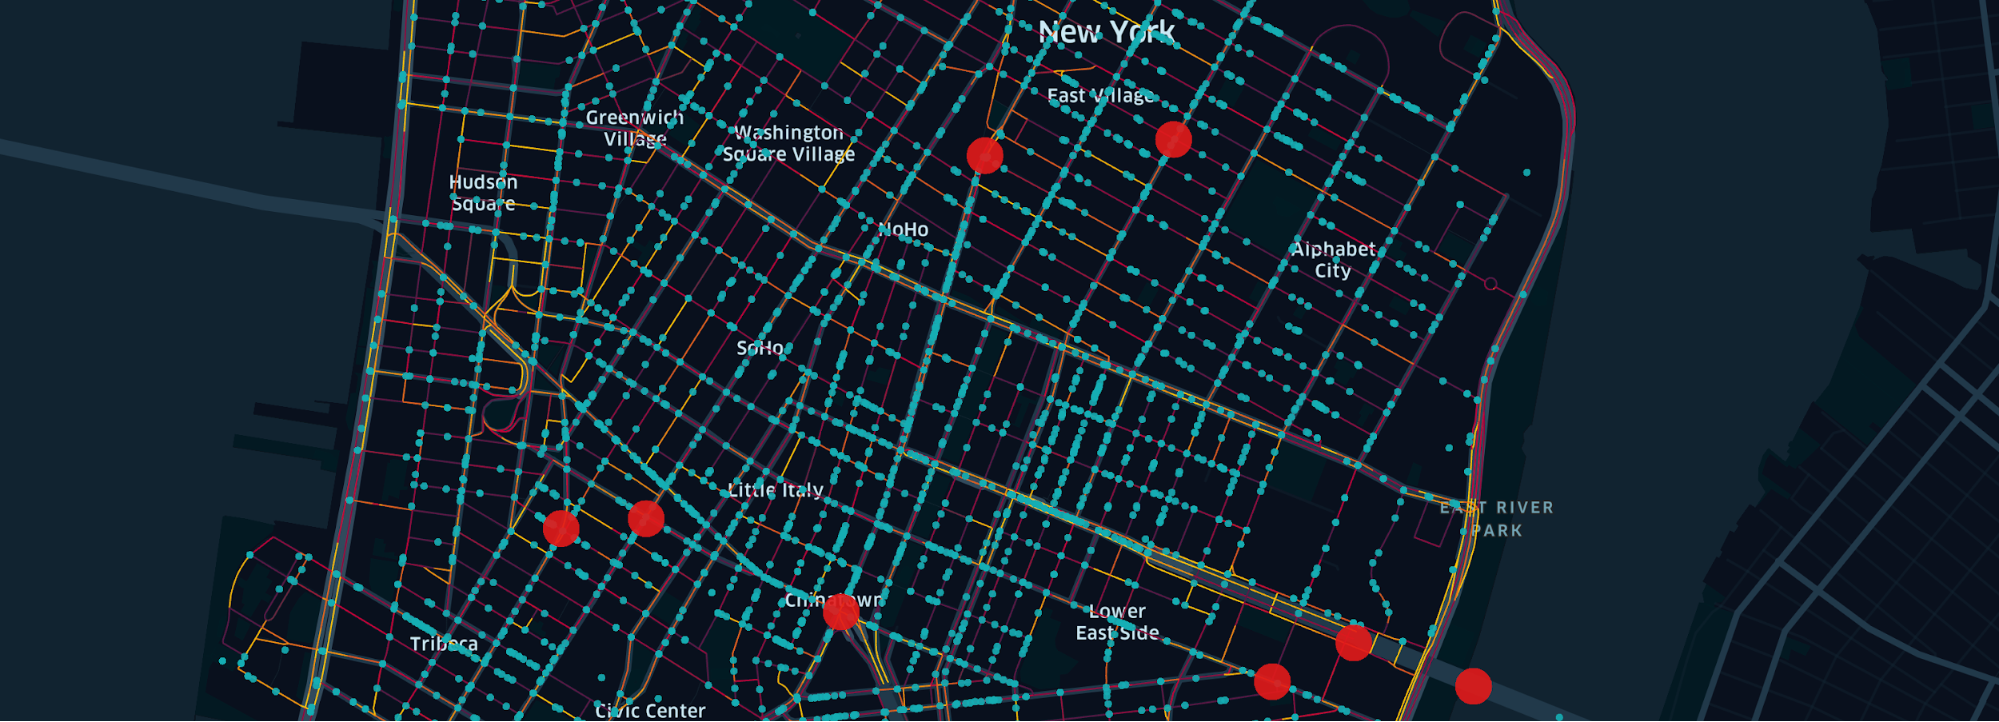 Visualizing Traffic Safety with Uber Movement Data and Kepler.gl